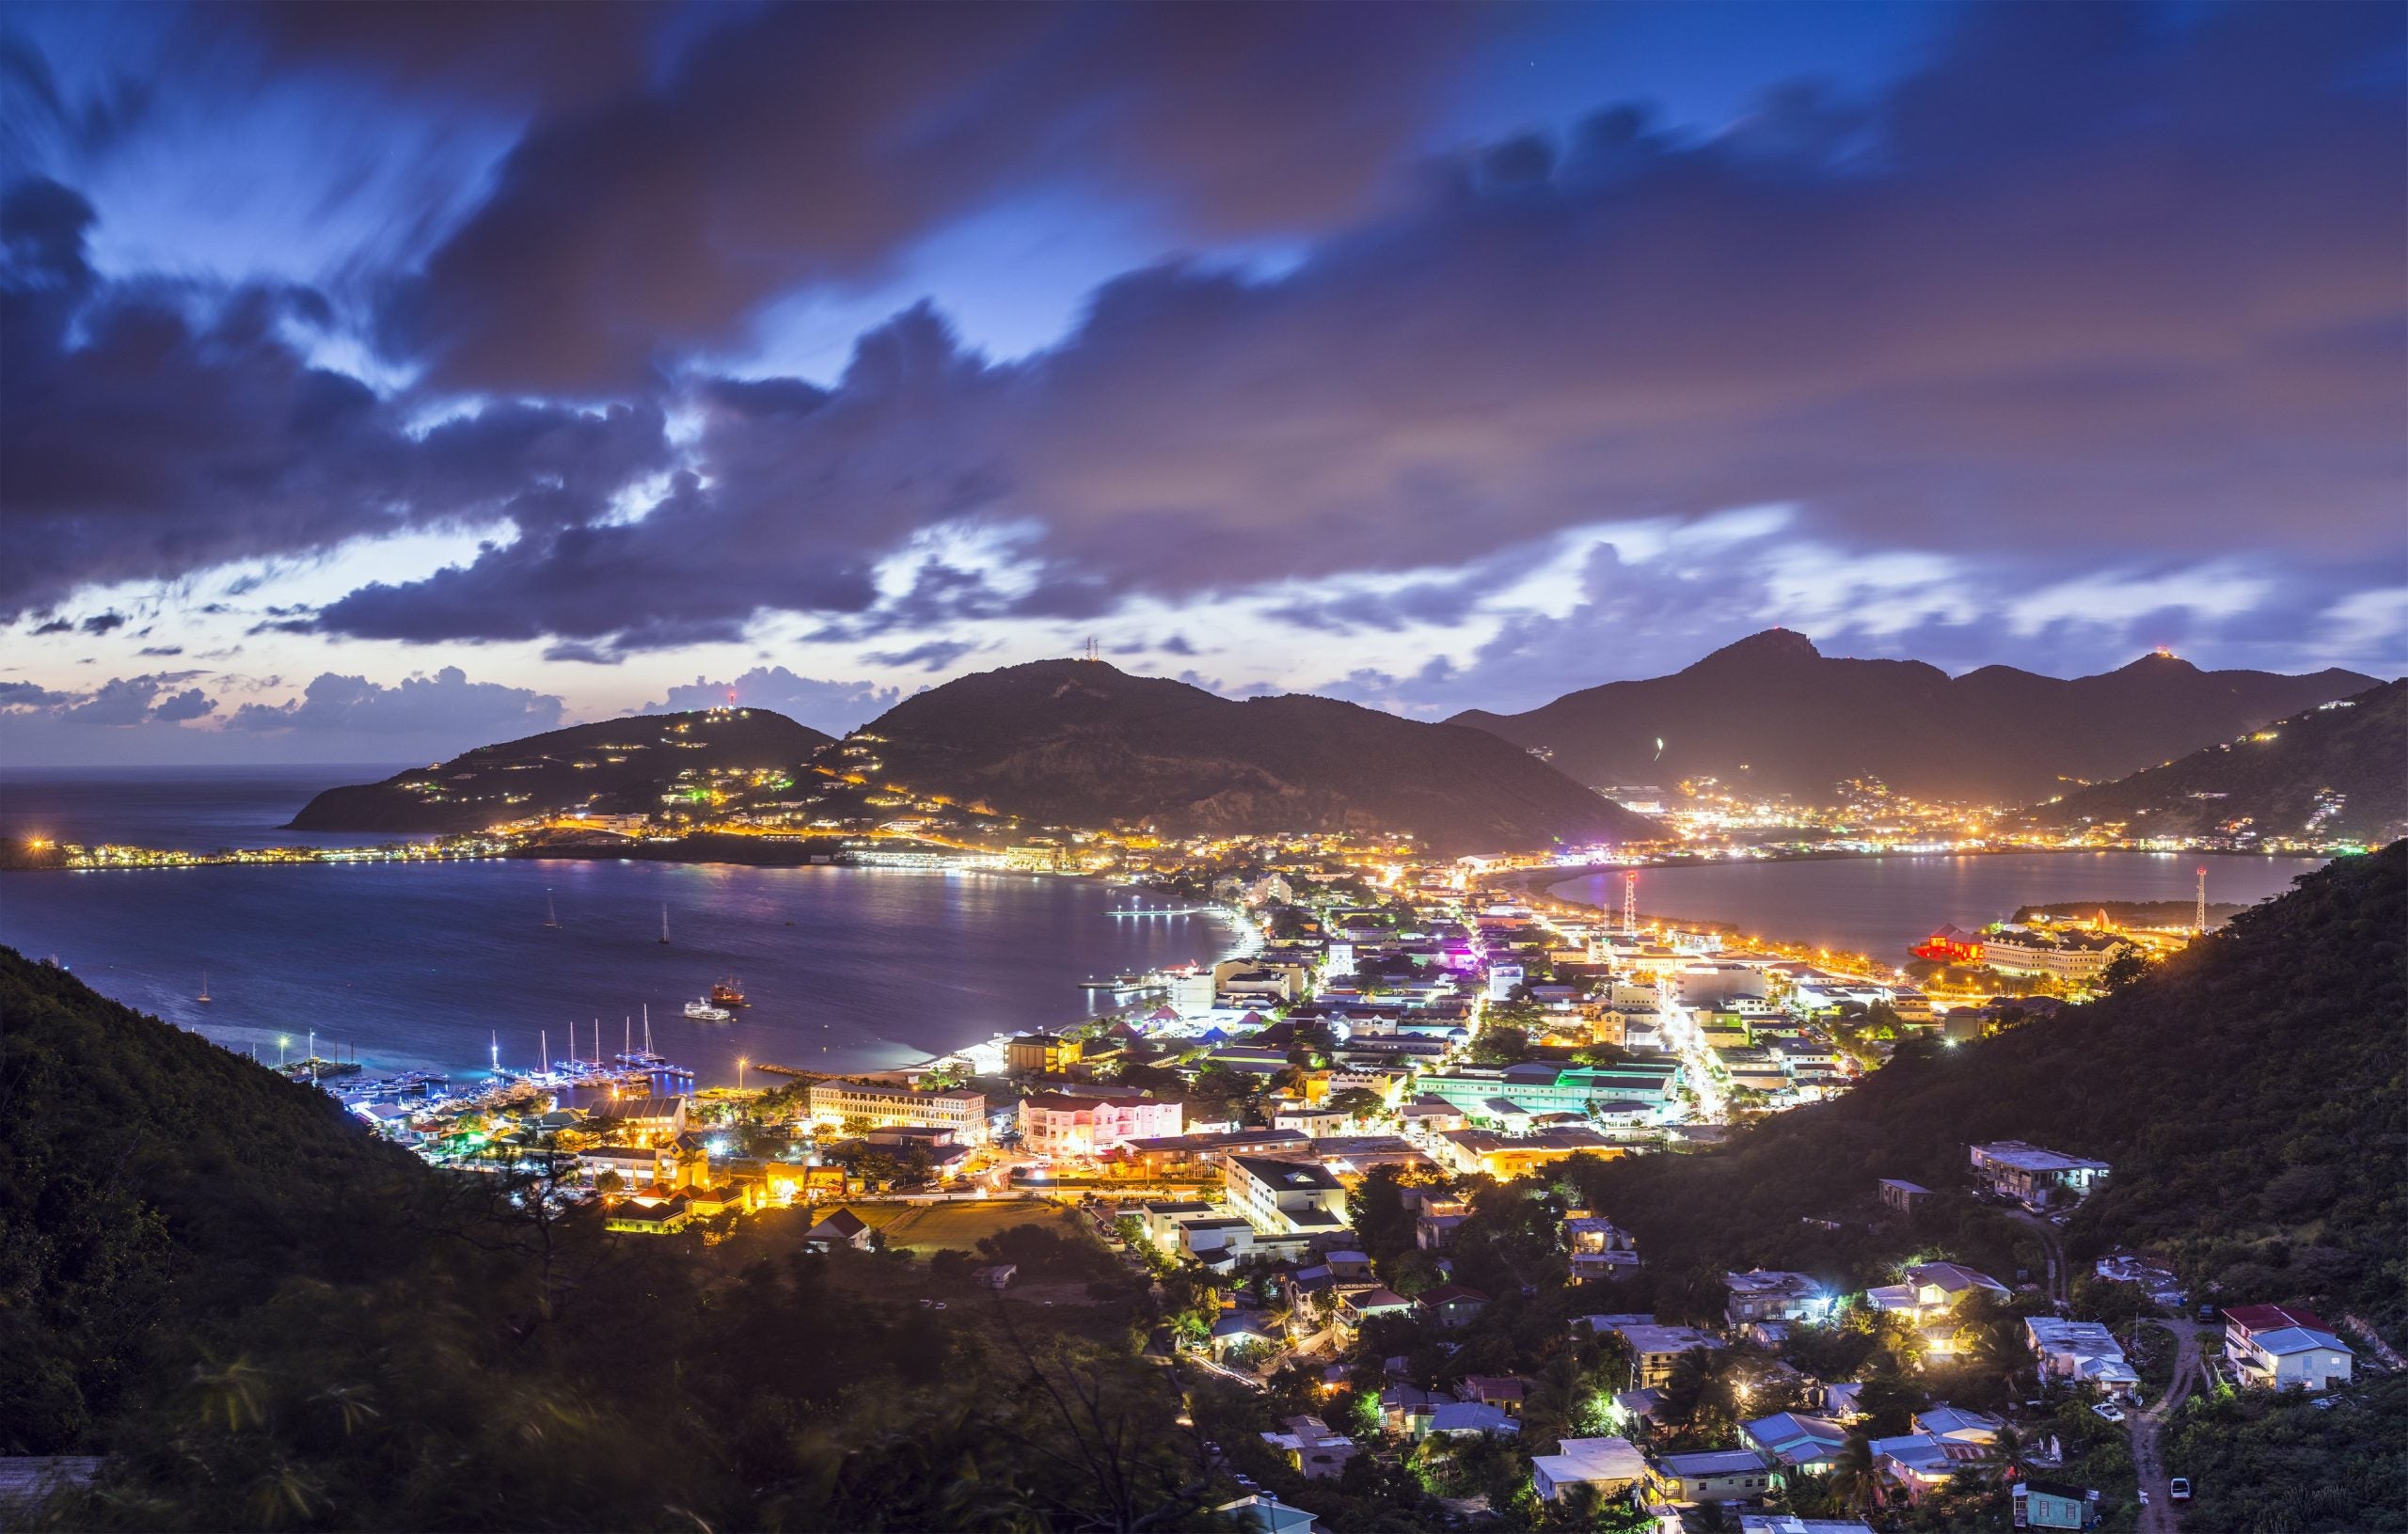 St. Martin’s at night and the buzzing party scene